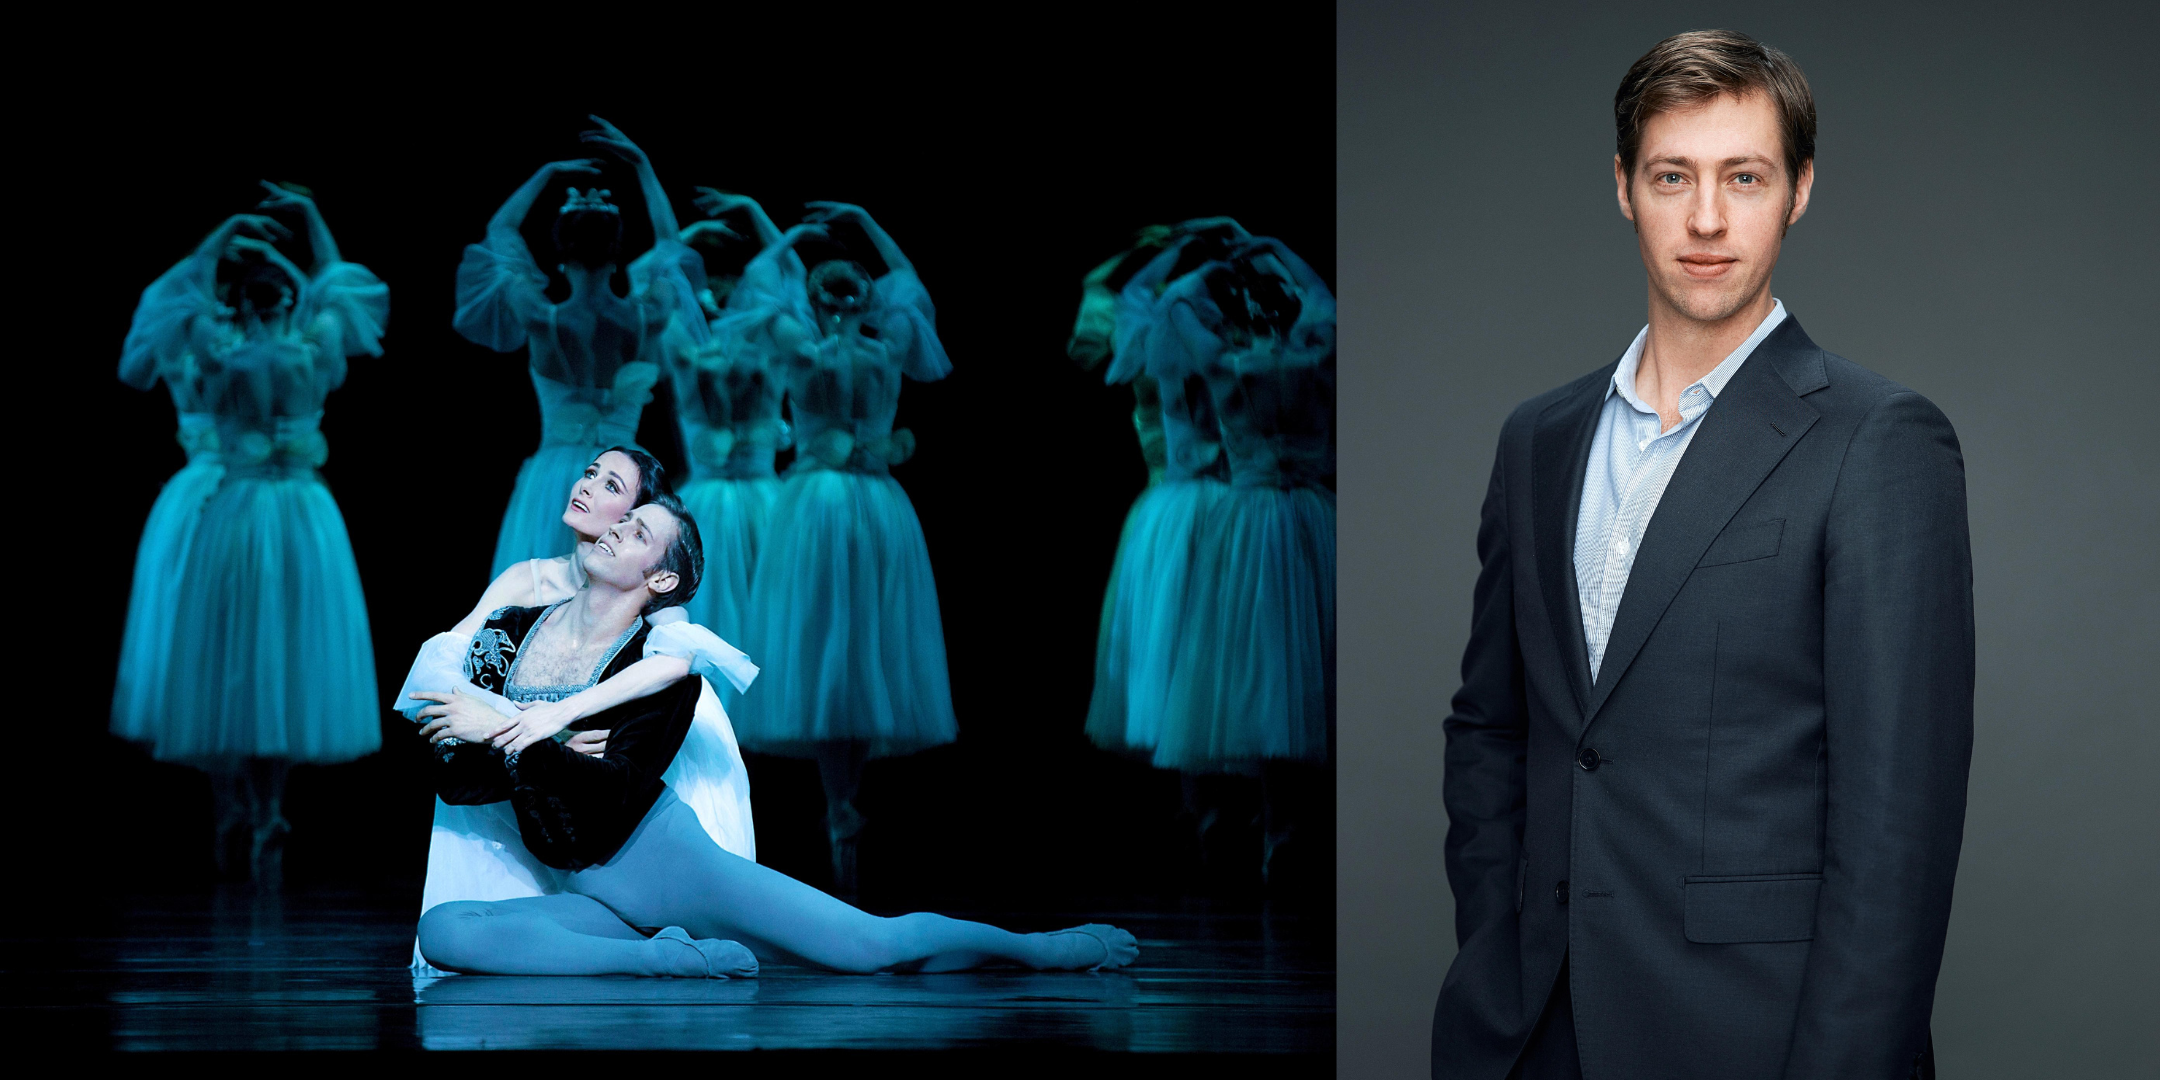 Two photos side-by-side. On the left, a male and female dancer perform as Albrecht and Giselle in "Giselle." On the right, Ty King-Wall poses for a portrait photo in a dark blue suit.